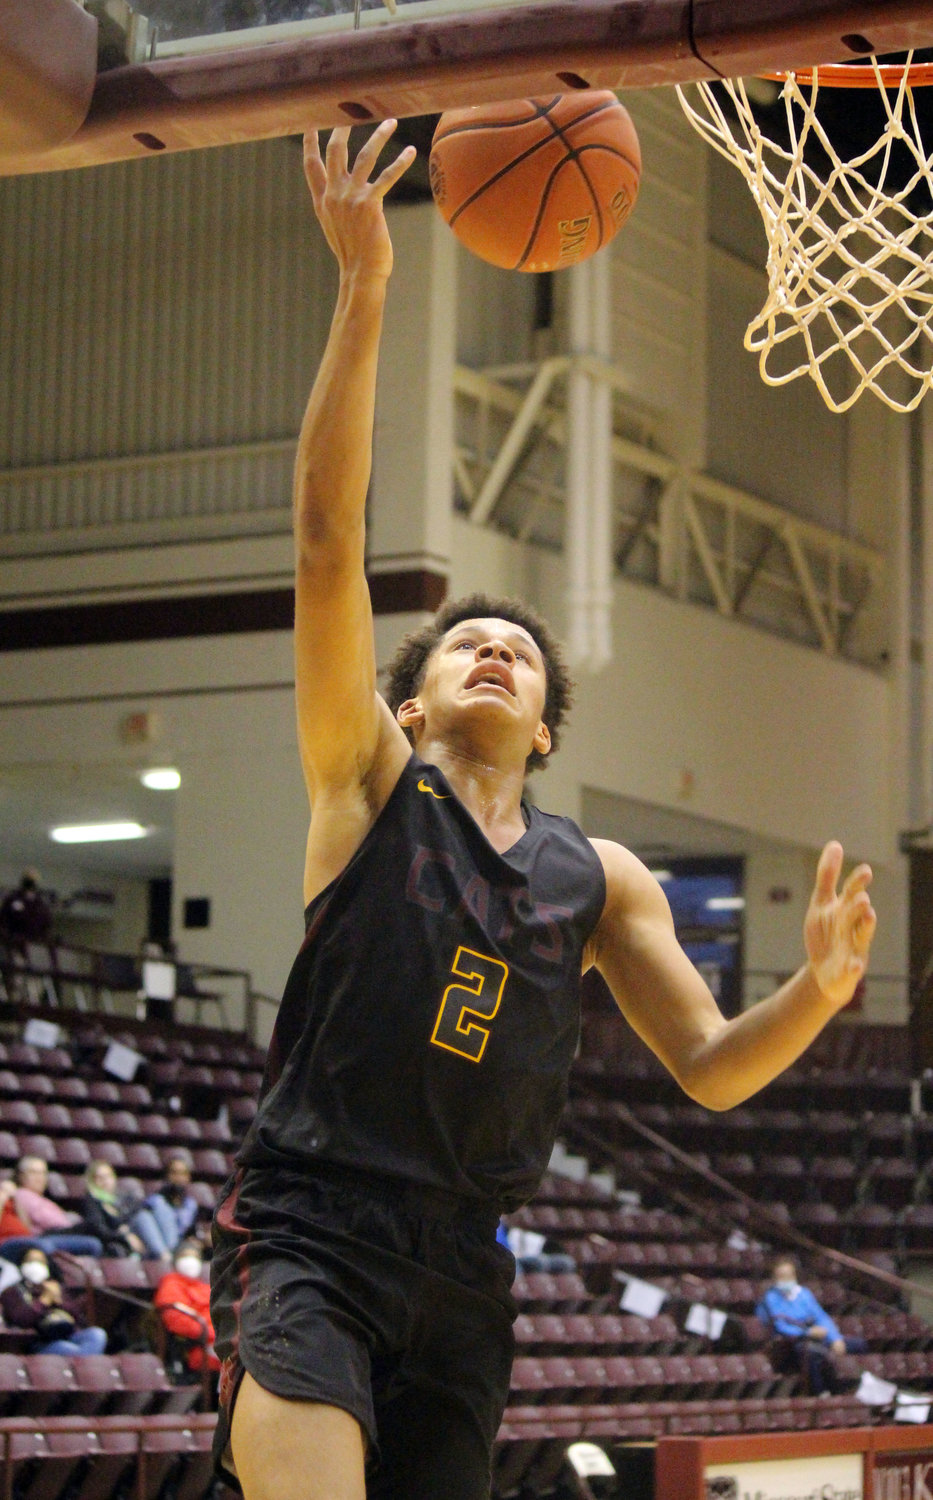 Rogersville’s JJ O’Neal goes up for a layup in the second half of the victory over Ozark during the 2020 tournament.